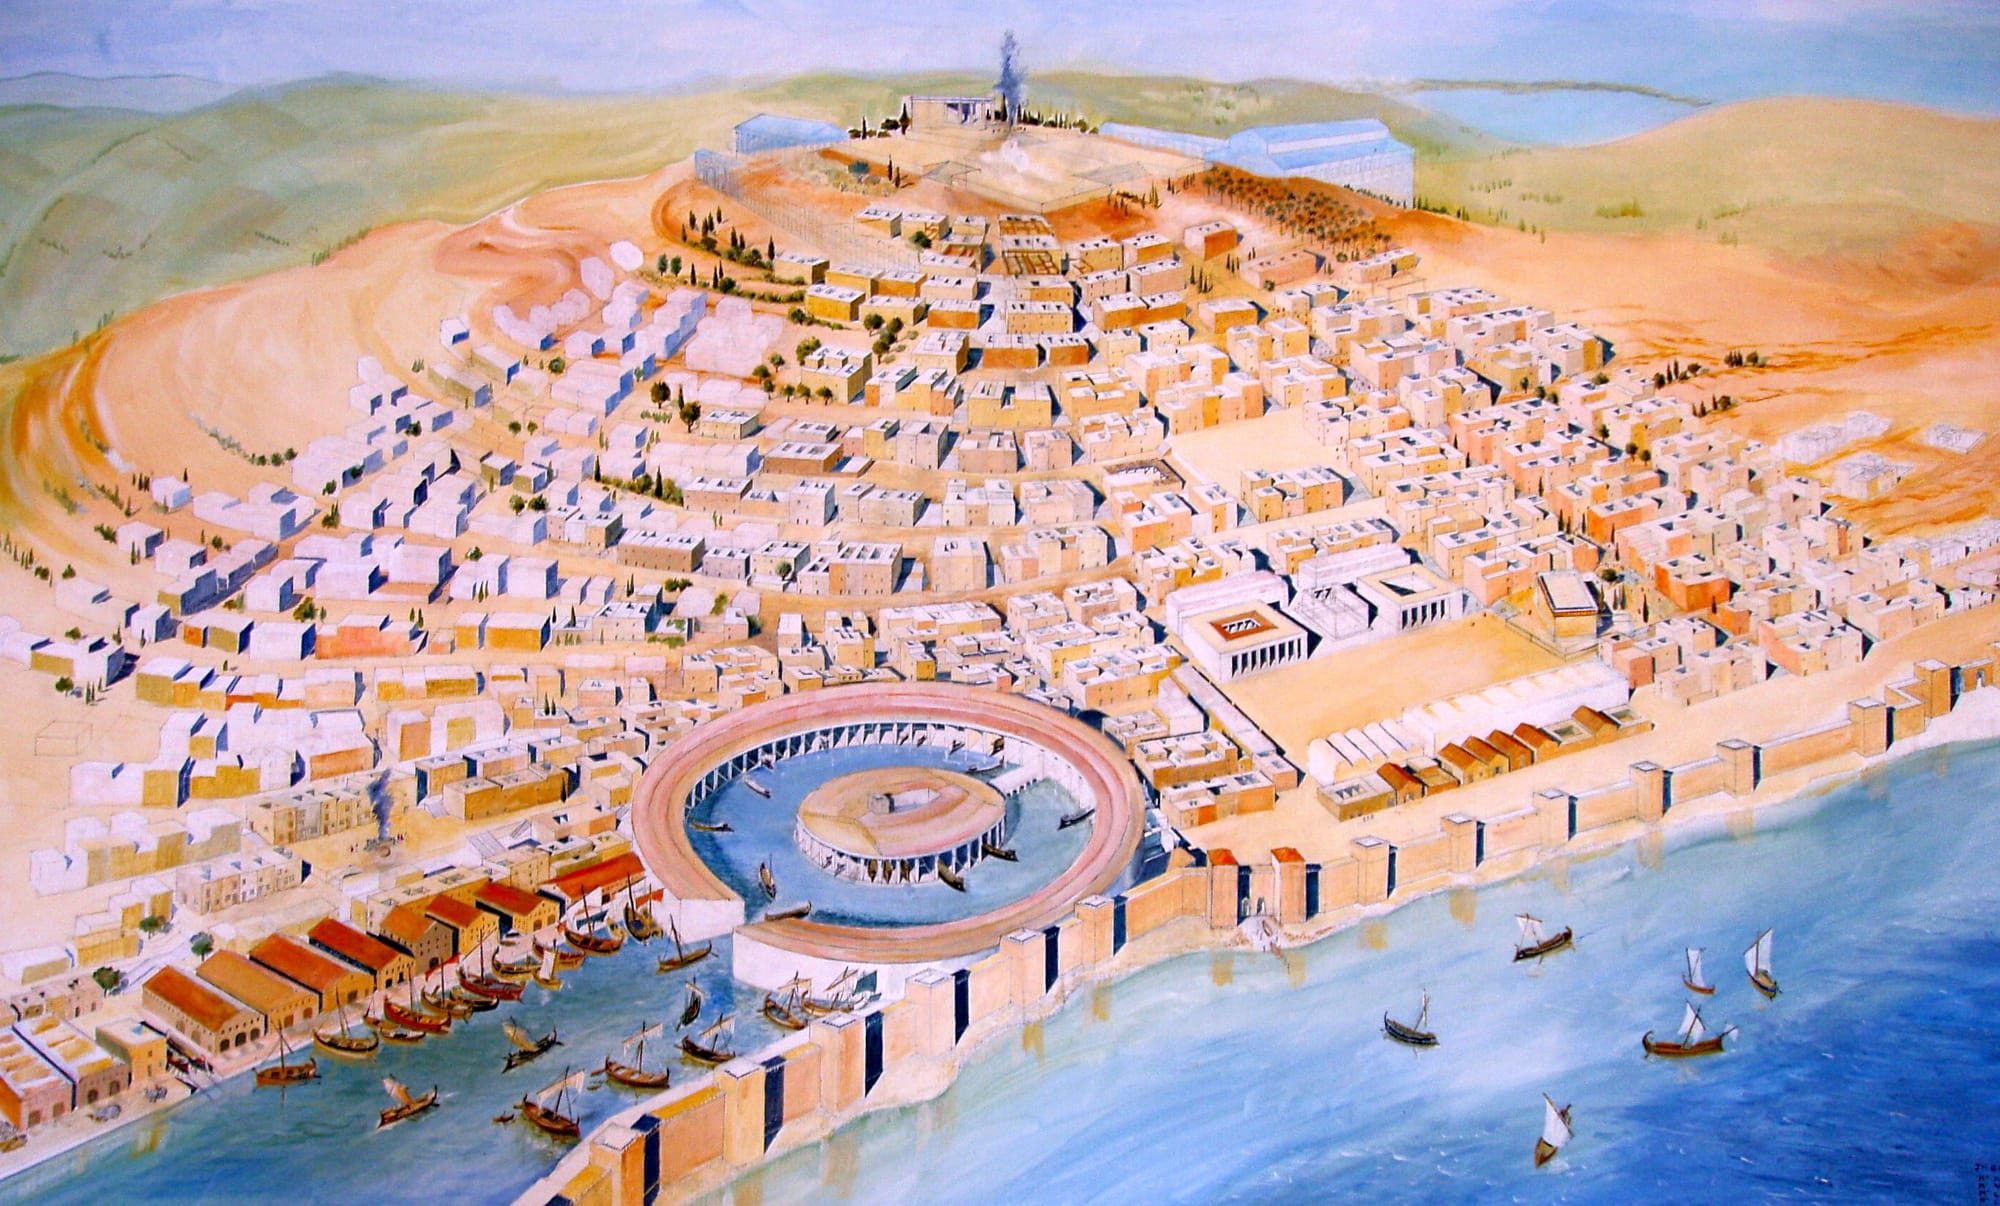 The 6 most Important Cities in the Roman Empire